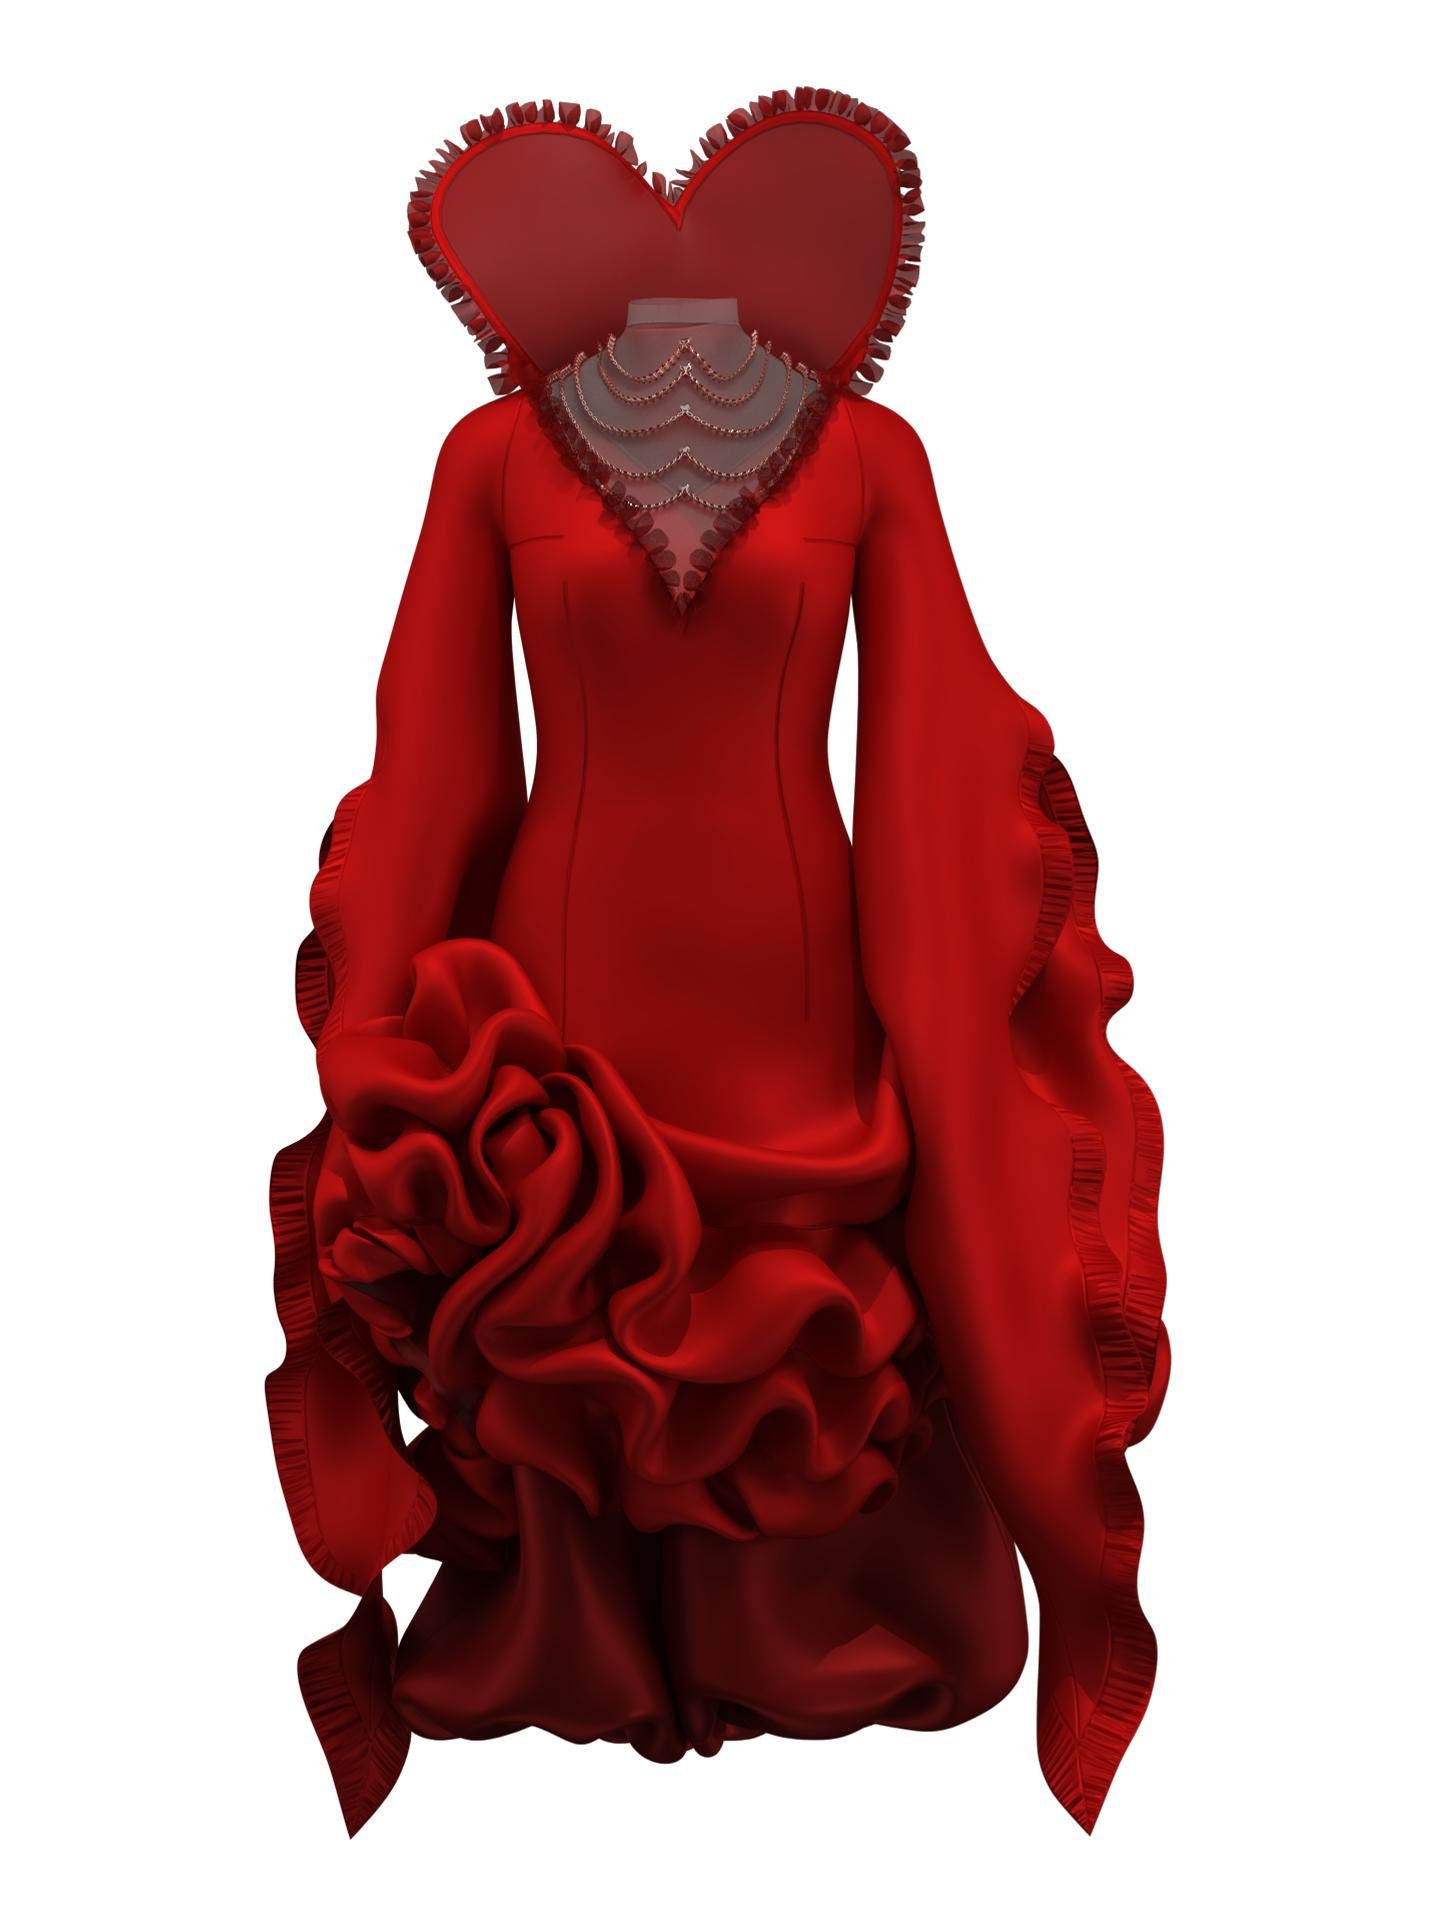 Queen of hearts dress by ANUK